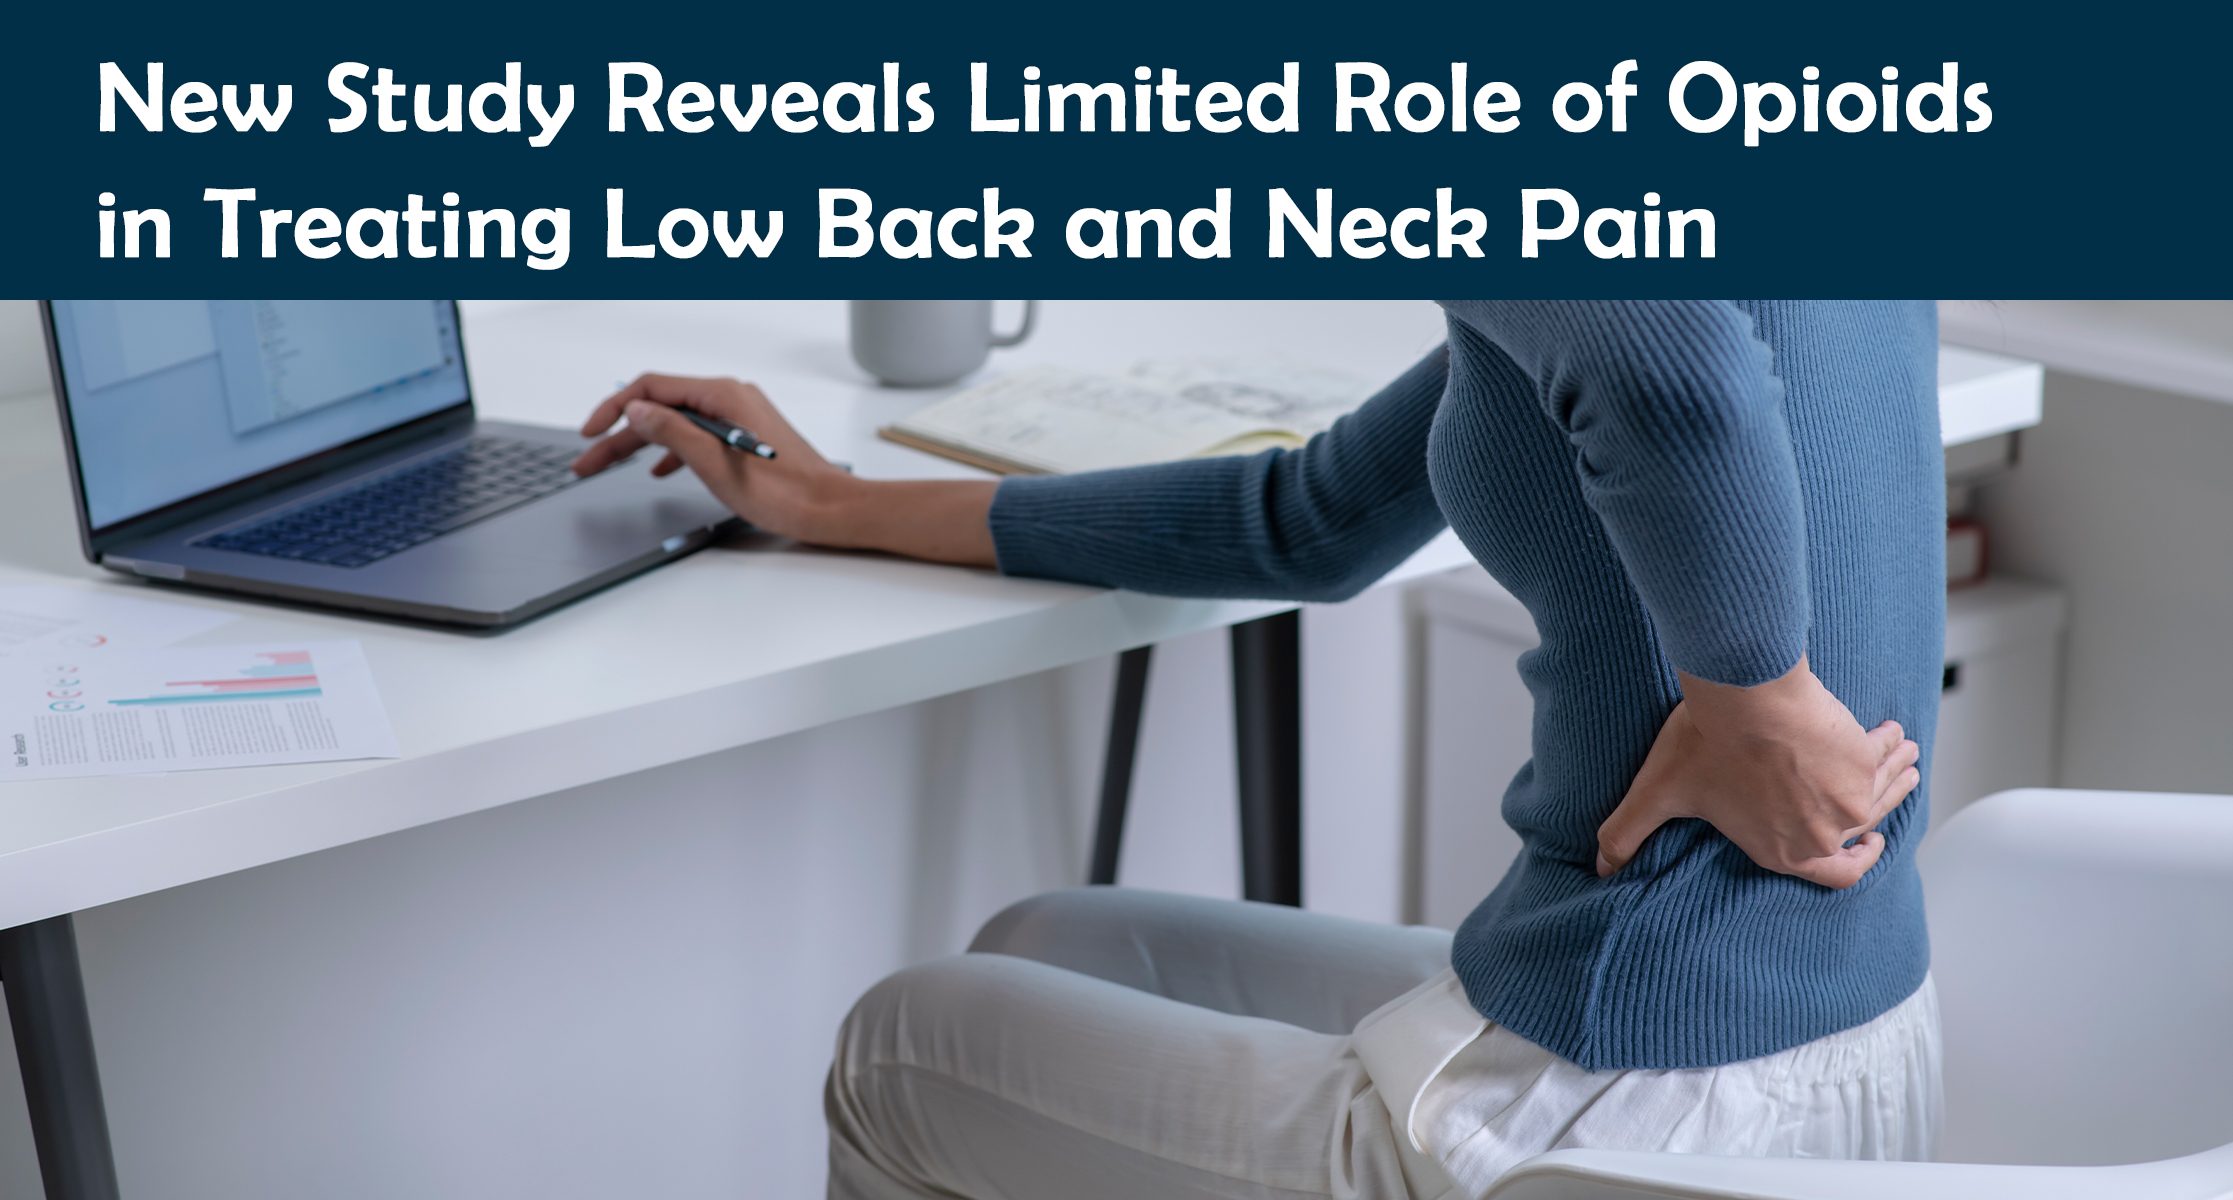 New Study Reveals Limited Role of Opioids in Treating Low Back and Neck Pain